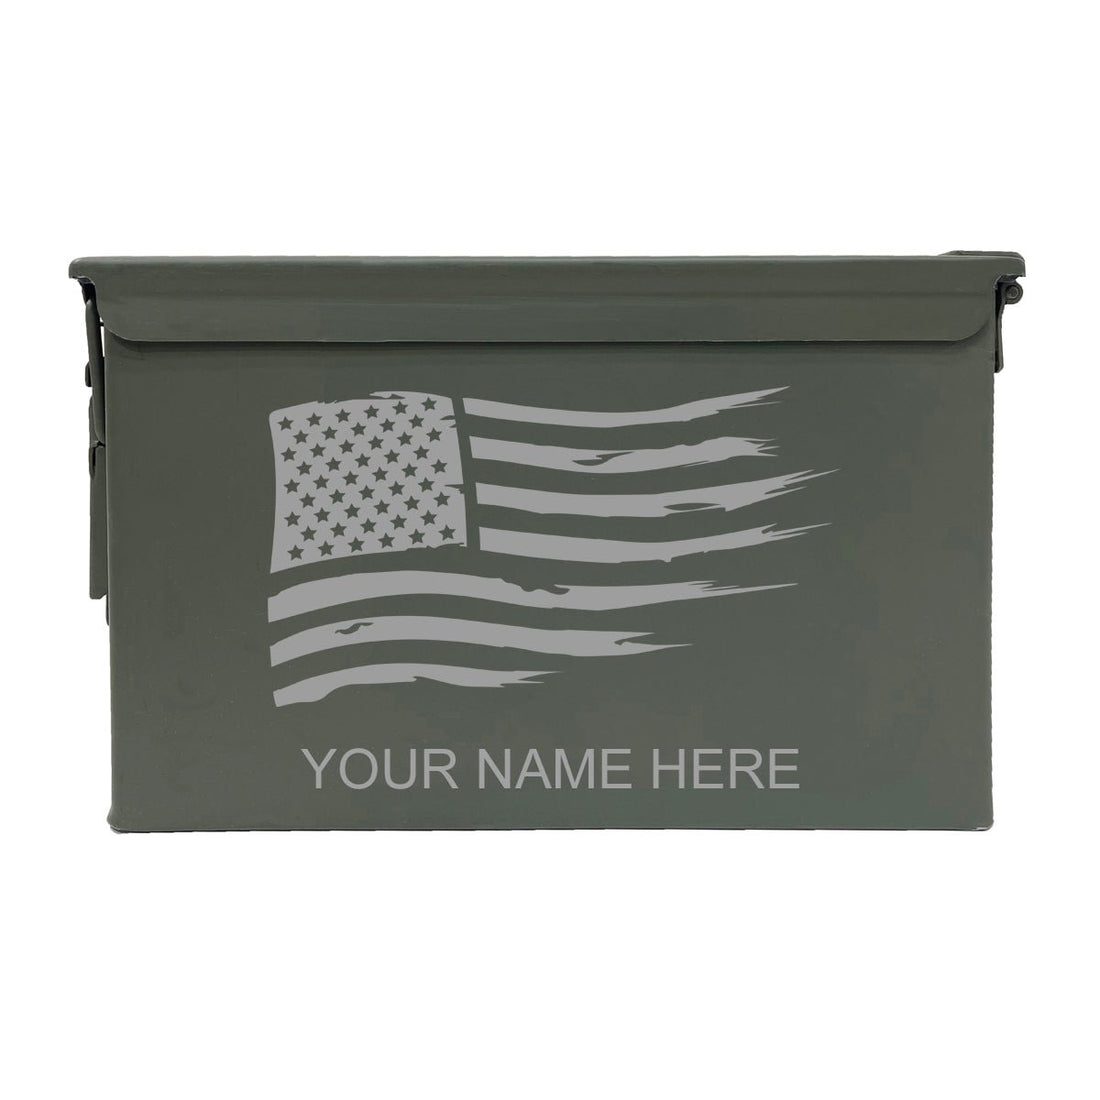 Laser Engraved - AMERICAN FLAG - Used Grade 1 Ammo Cans - 30 Cal, 50 Cal or Fat 50 - ATOM Promotions